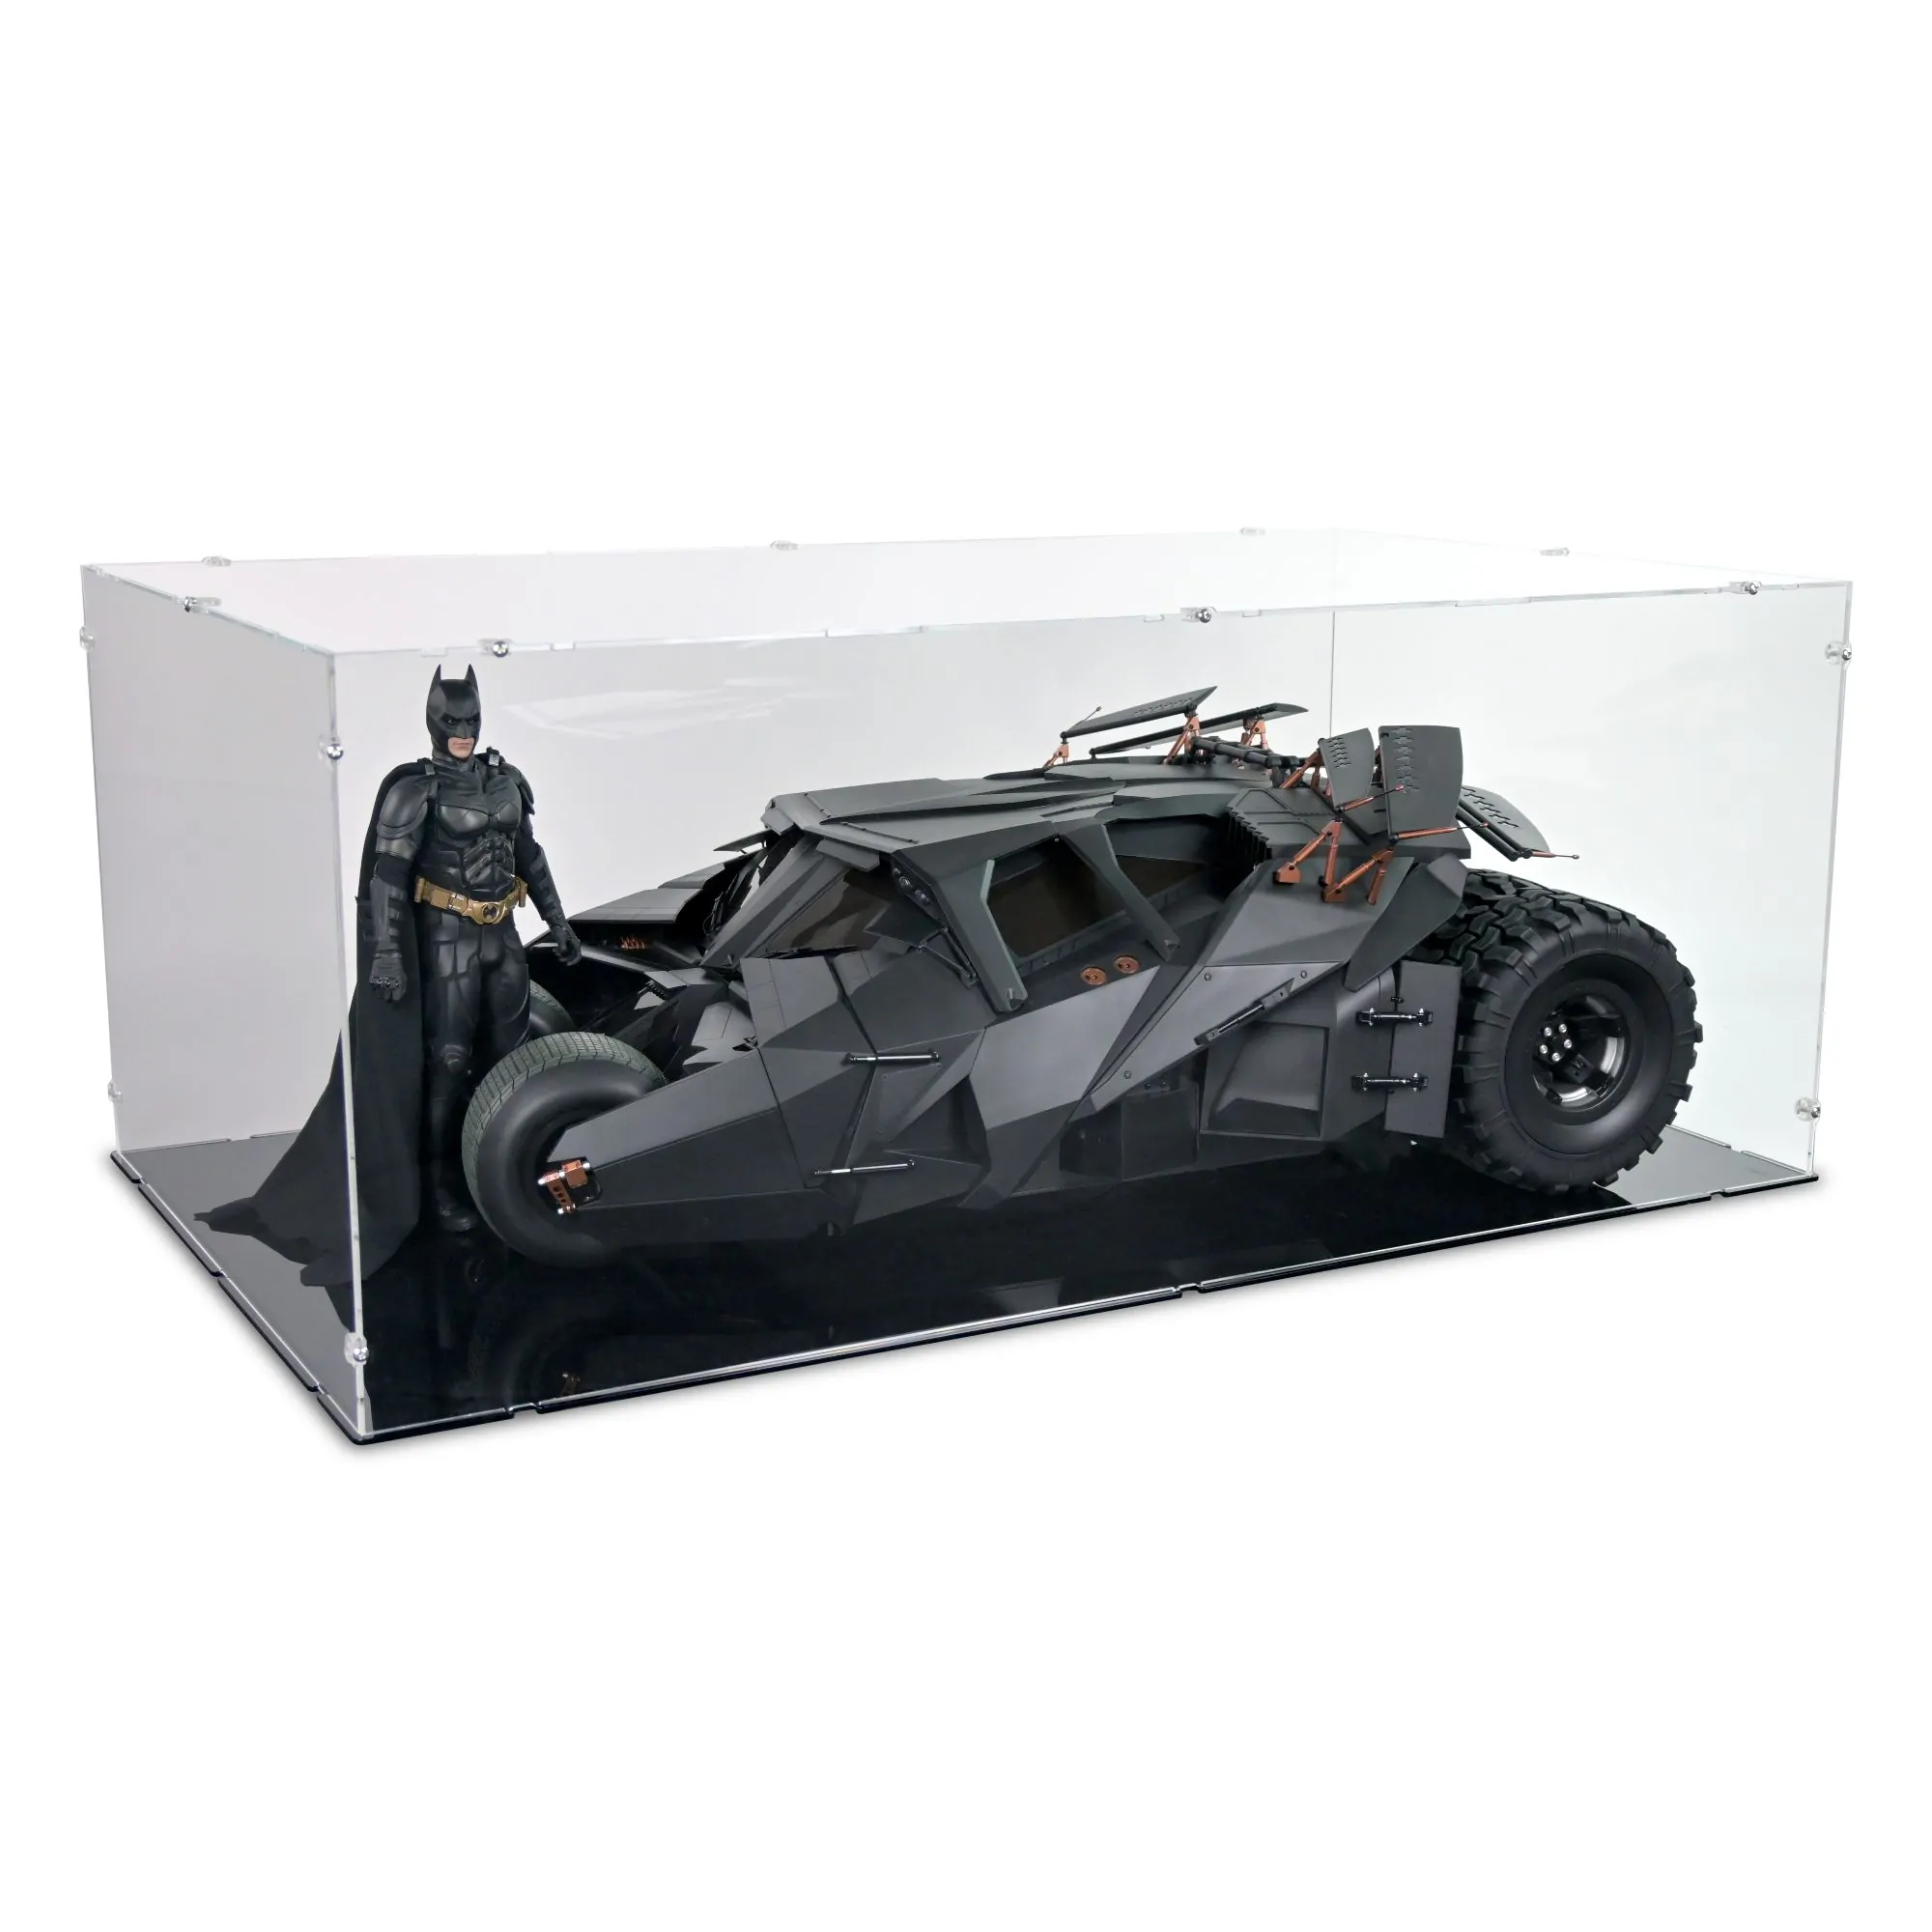 XL Display Case for Hot Toys 1/6 Scale Batmobile Tumbler